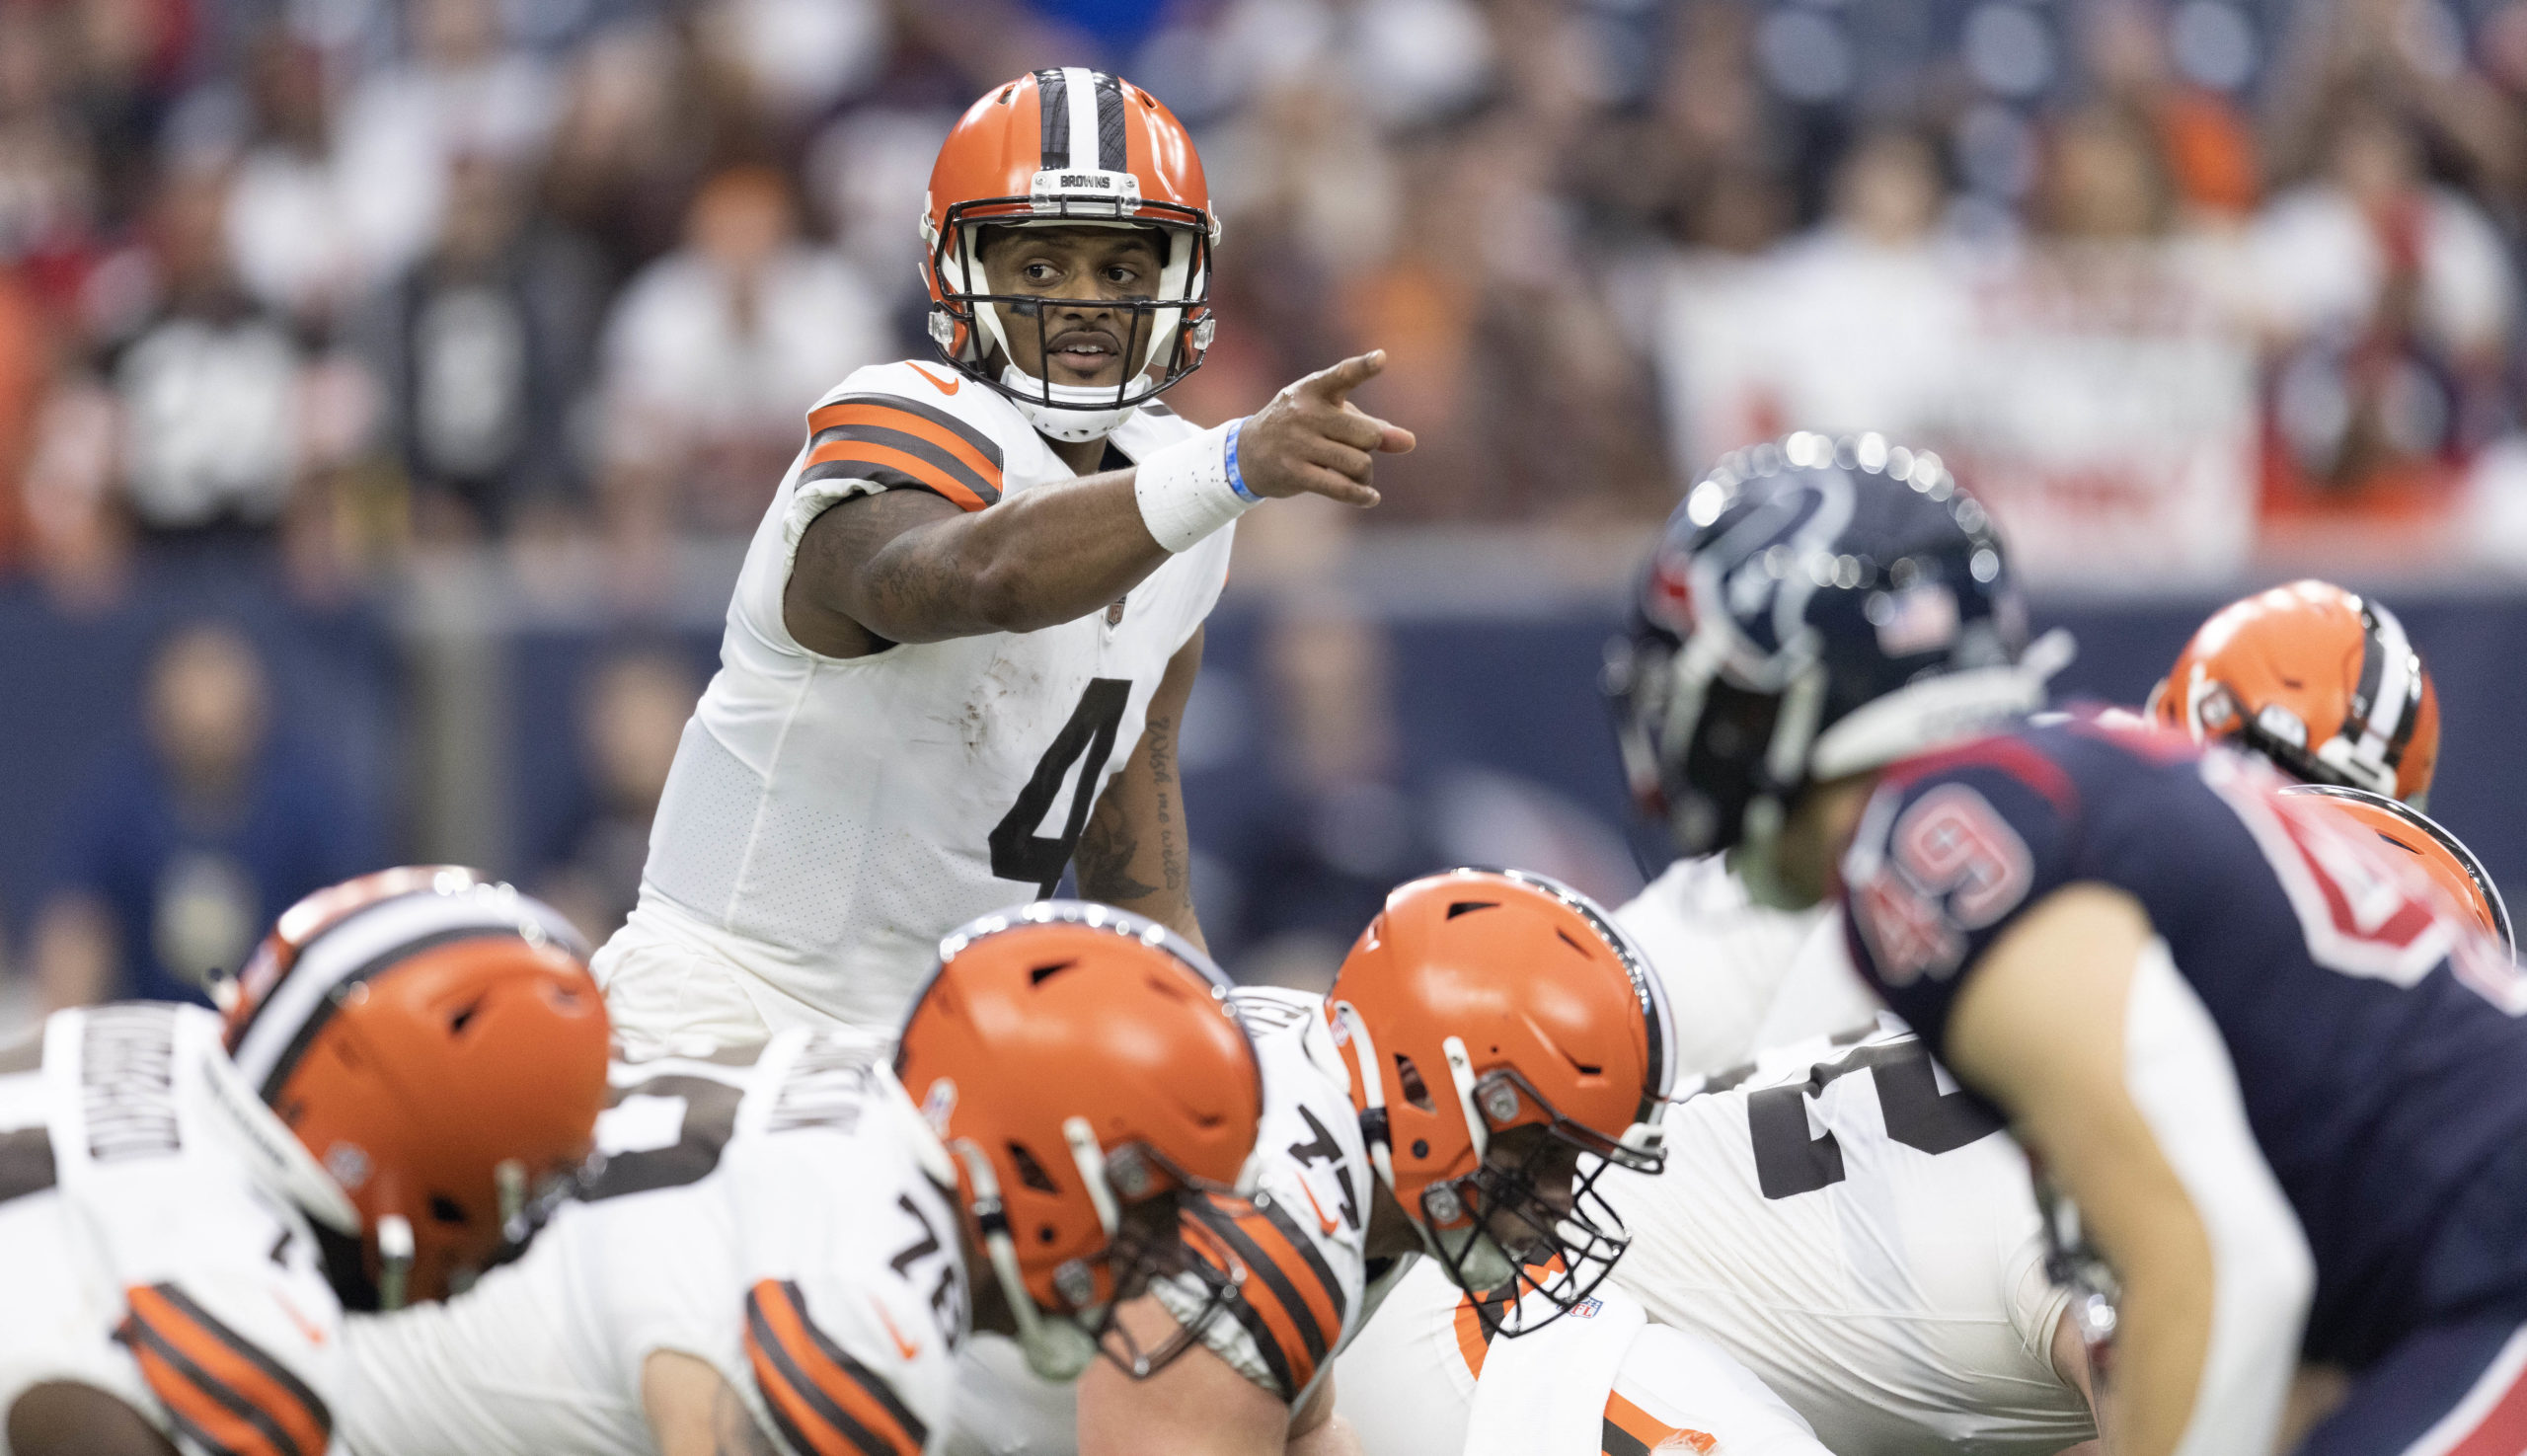 Despite Watson’s Poor Debut, Browns Fans Should Be Excited for Future